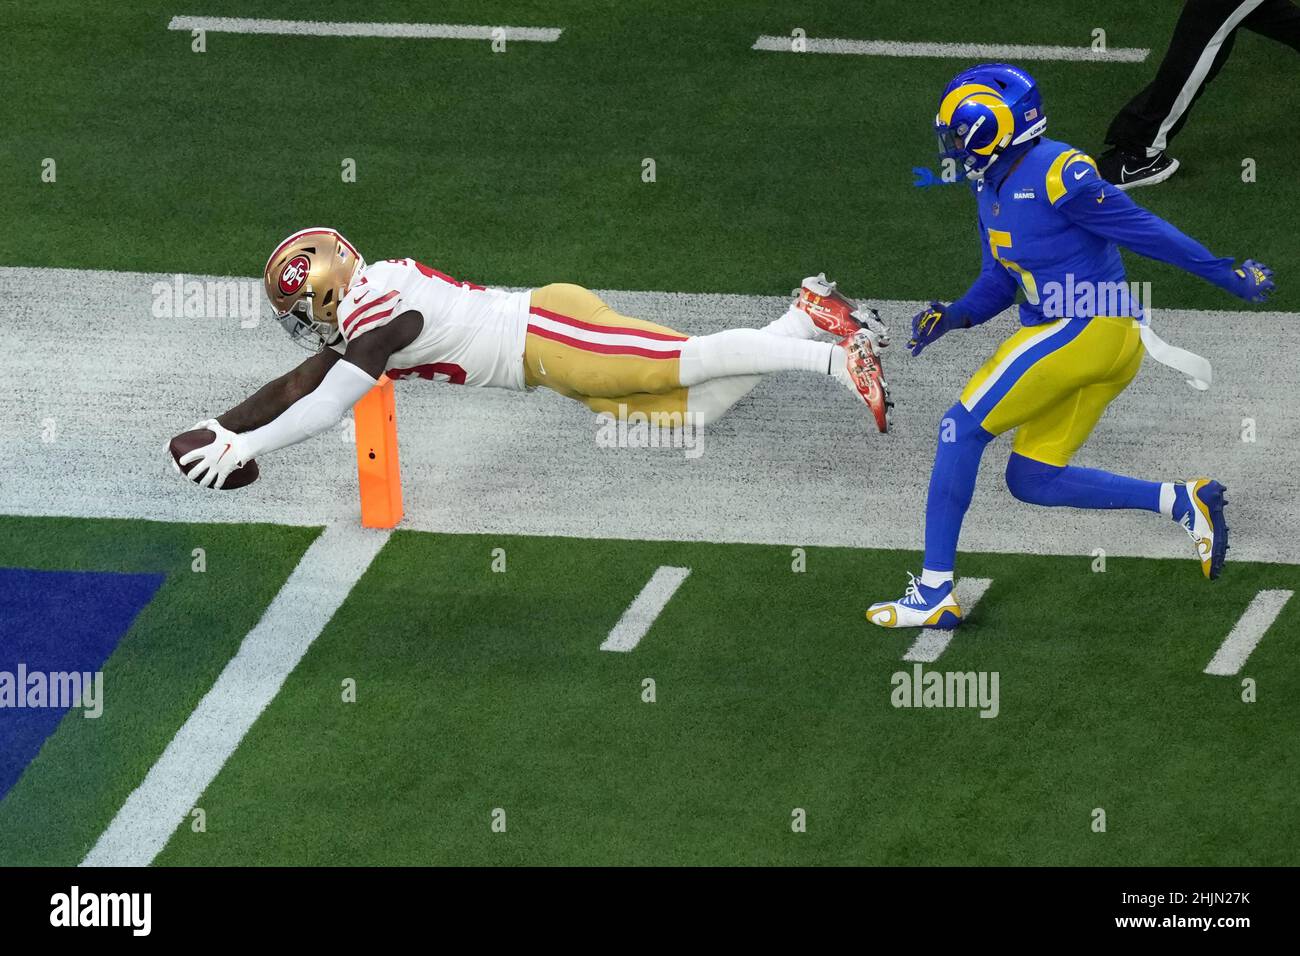 Inglewood, United States. 30th Jan, 2022. San Francisco 49ers Deebo Samuel scores on a 44 yard touchdown reception in front of Los Angeles Rams Jalen Ramsey during second quarter action in their NFC Championship game at SoFi Stadium in Inglewood, California on Sunday, January 30, 2022. The Rams beat the 49ers 20-17. Photo by Jon SooHoo/UPI Credit: UPI/Alamy Live News Stock Photo